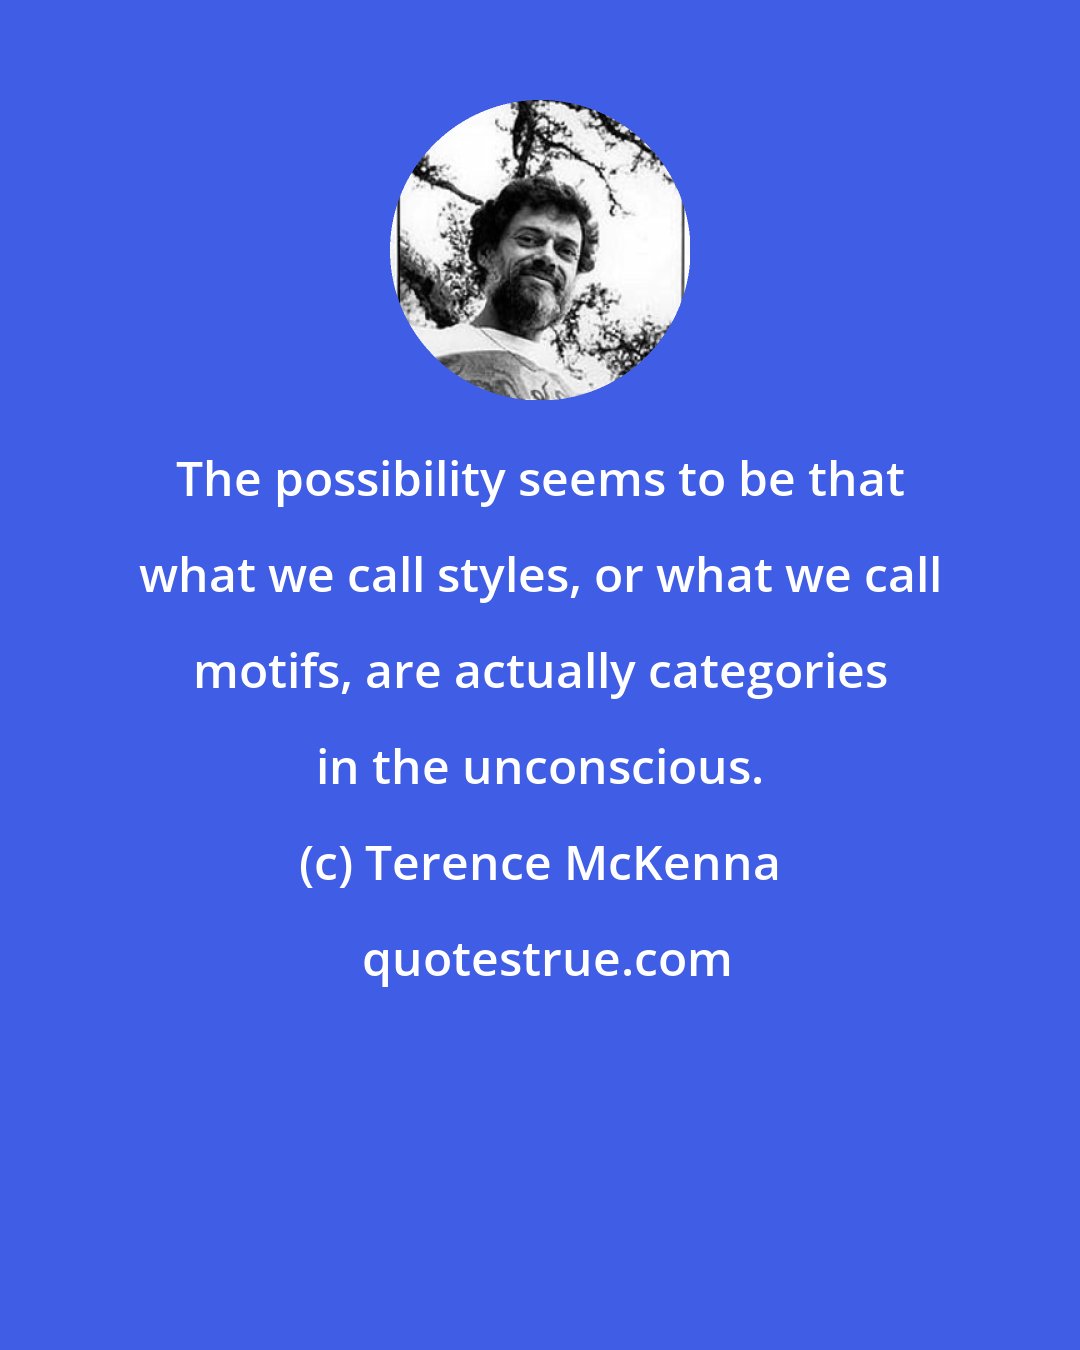 Terence McKenna: The possibility seems to be that what we call styles, or what we call motifs, are actually categories in the unconscious.